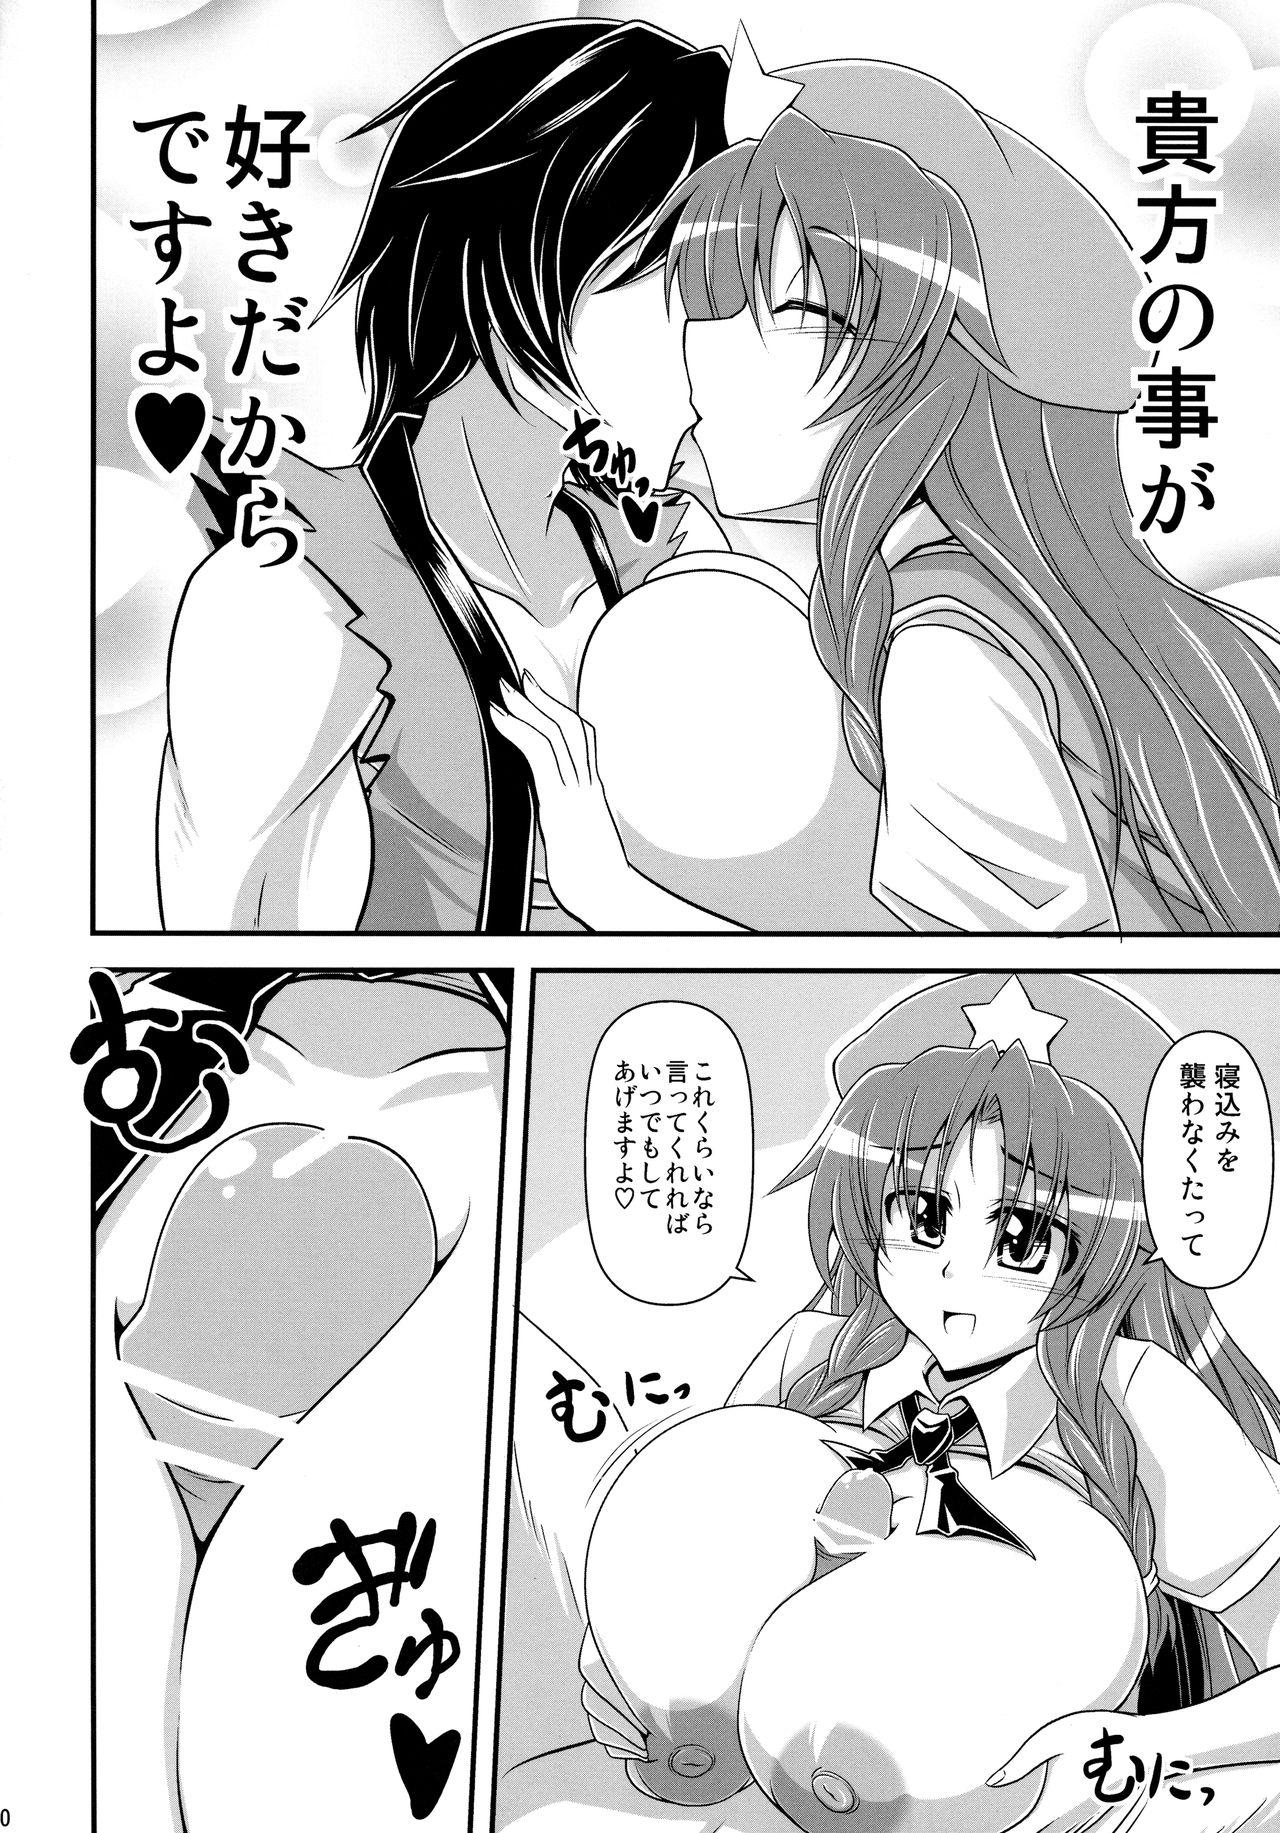 Doggystyle Porn I Love Meirin - Touhou project Amateur Porno - Page 9